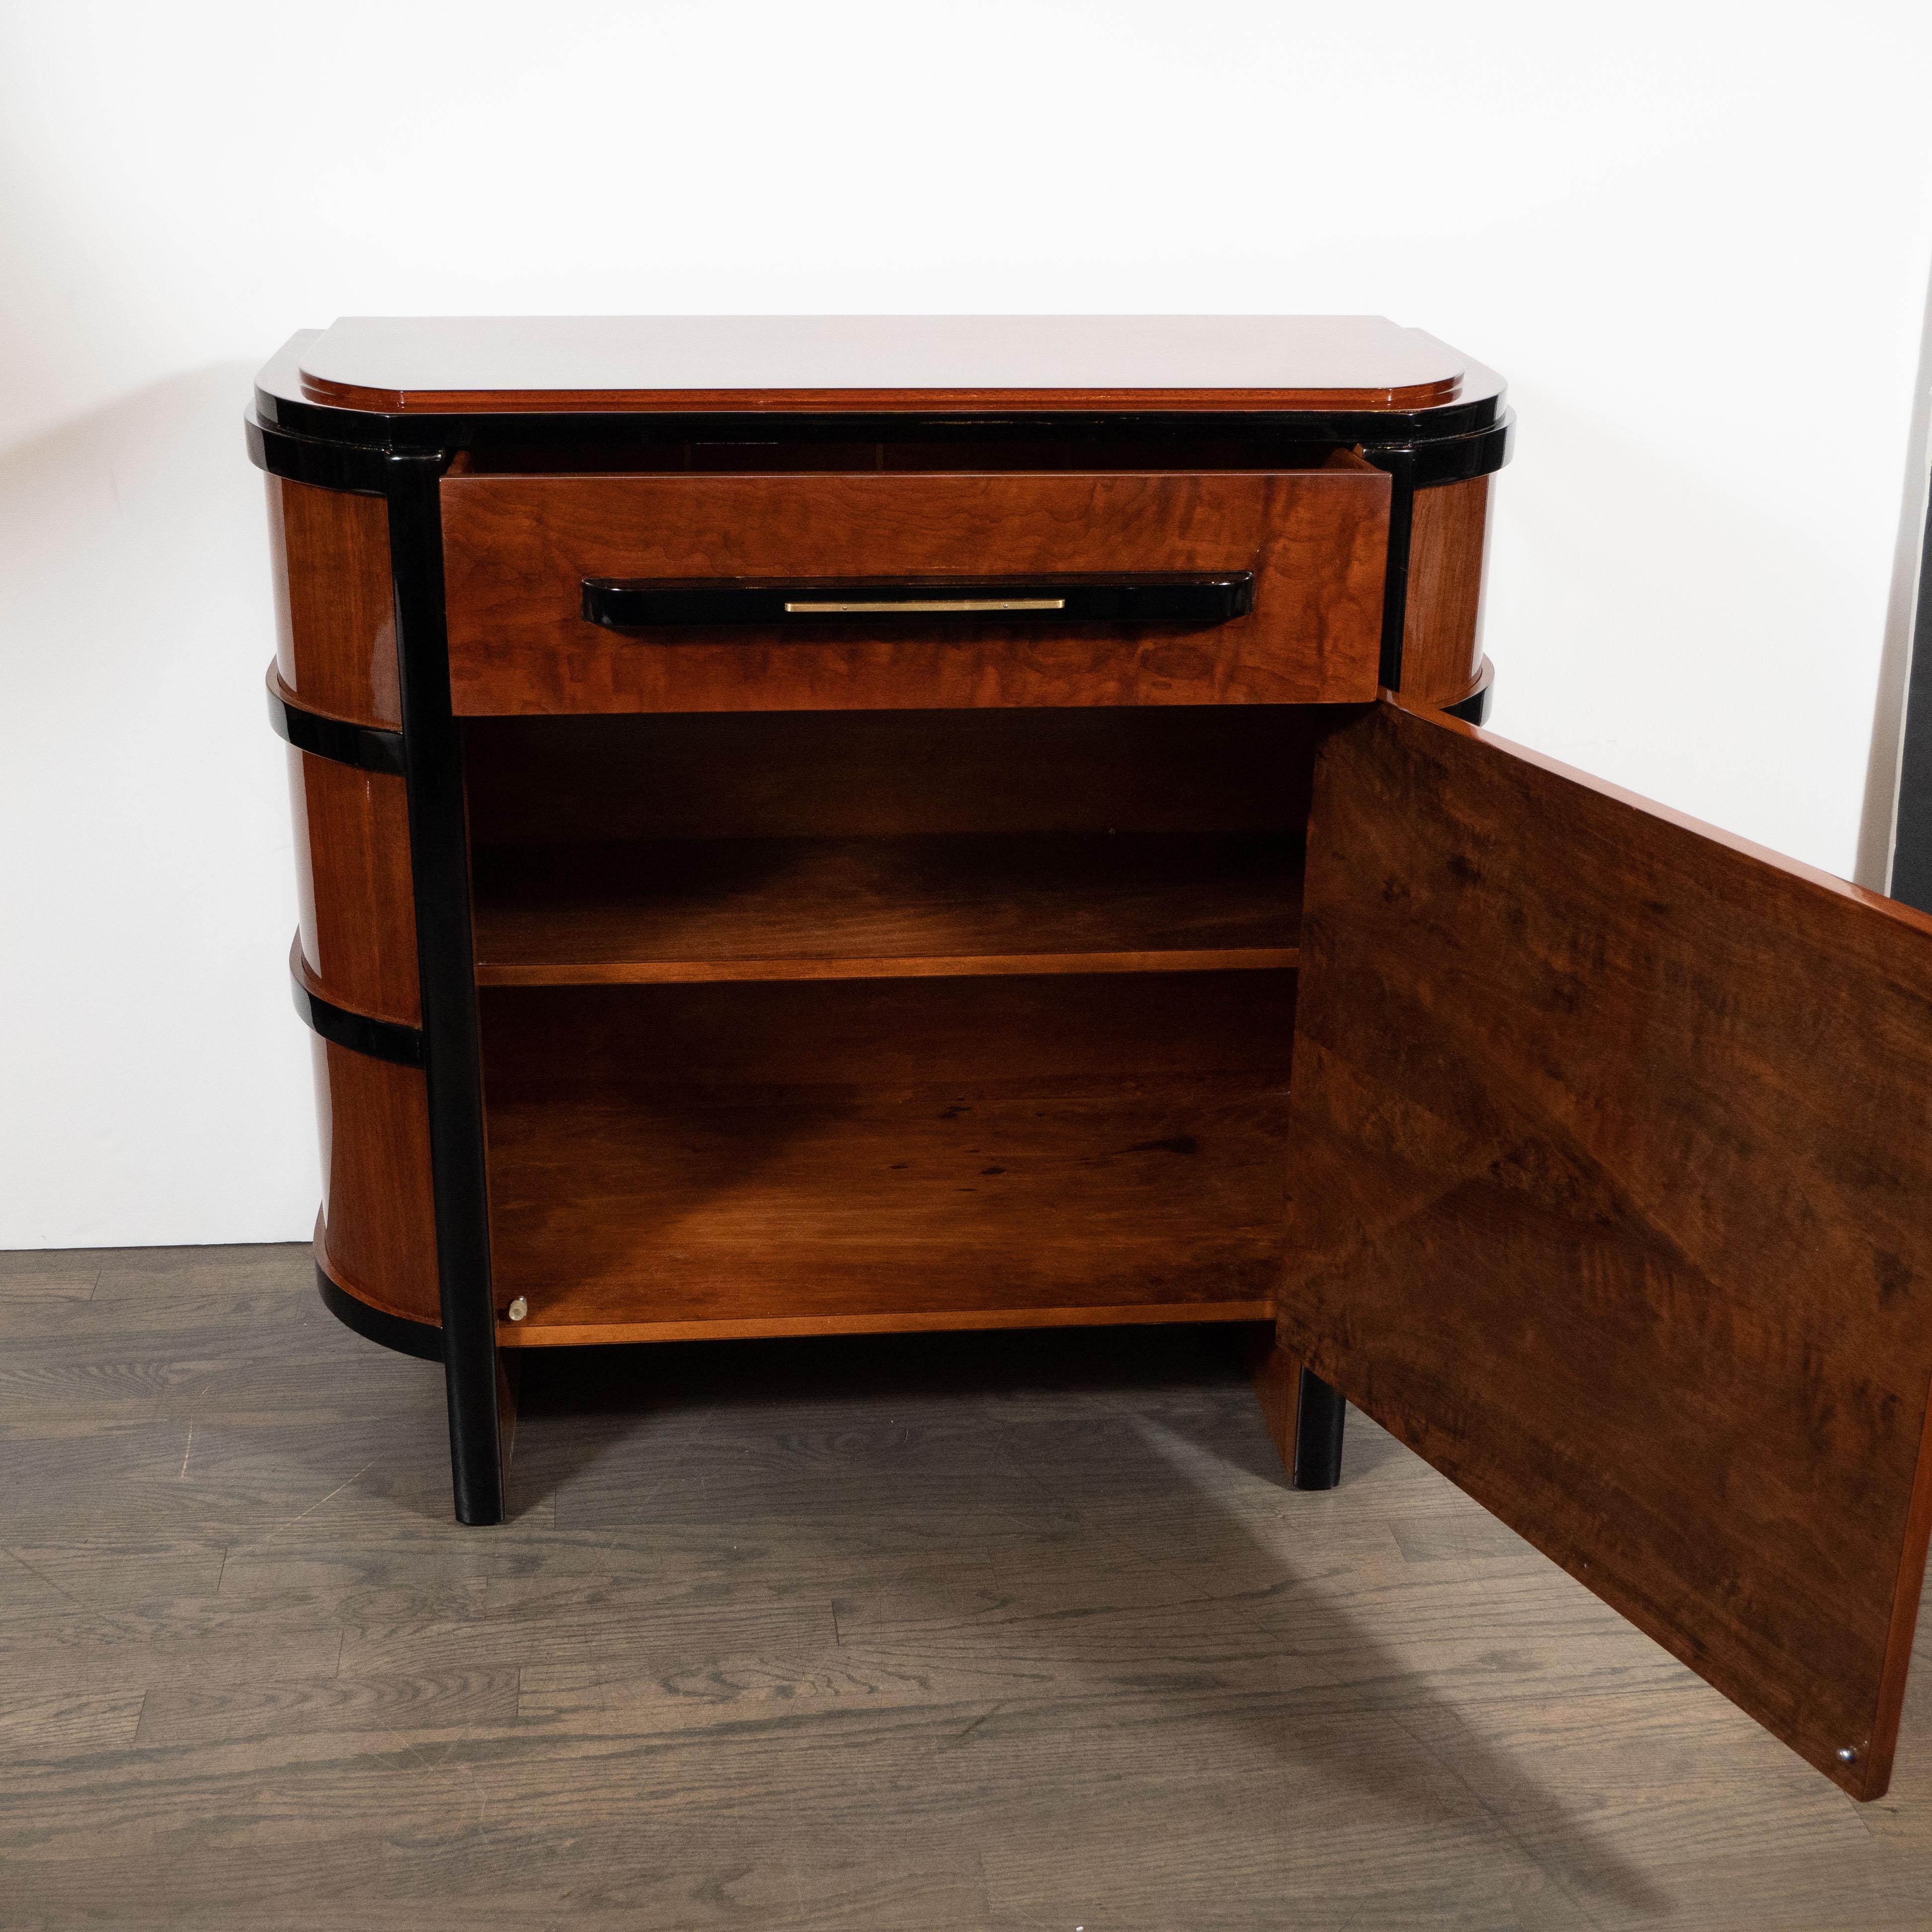 American Art Deco Streamlined Bookmatched Walnut & Black Lacquer Cabinet by Donald Deskey